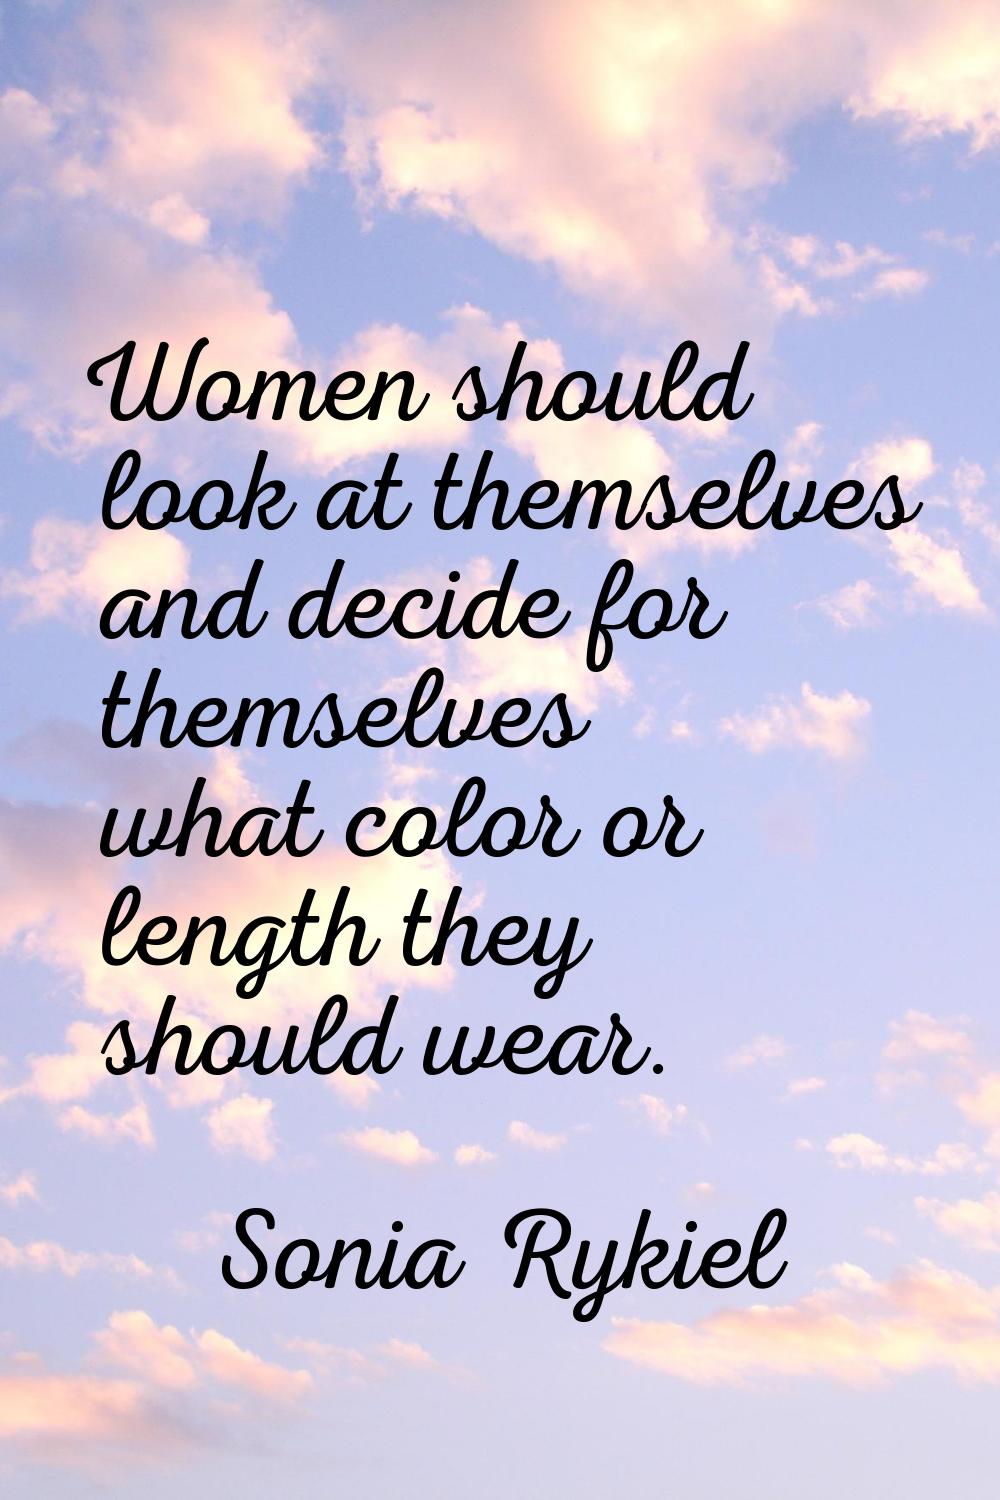 Women should look at themselves and decide for themselves what color or length they should wear.